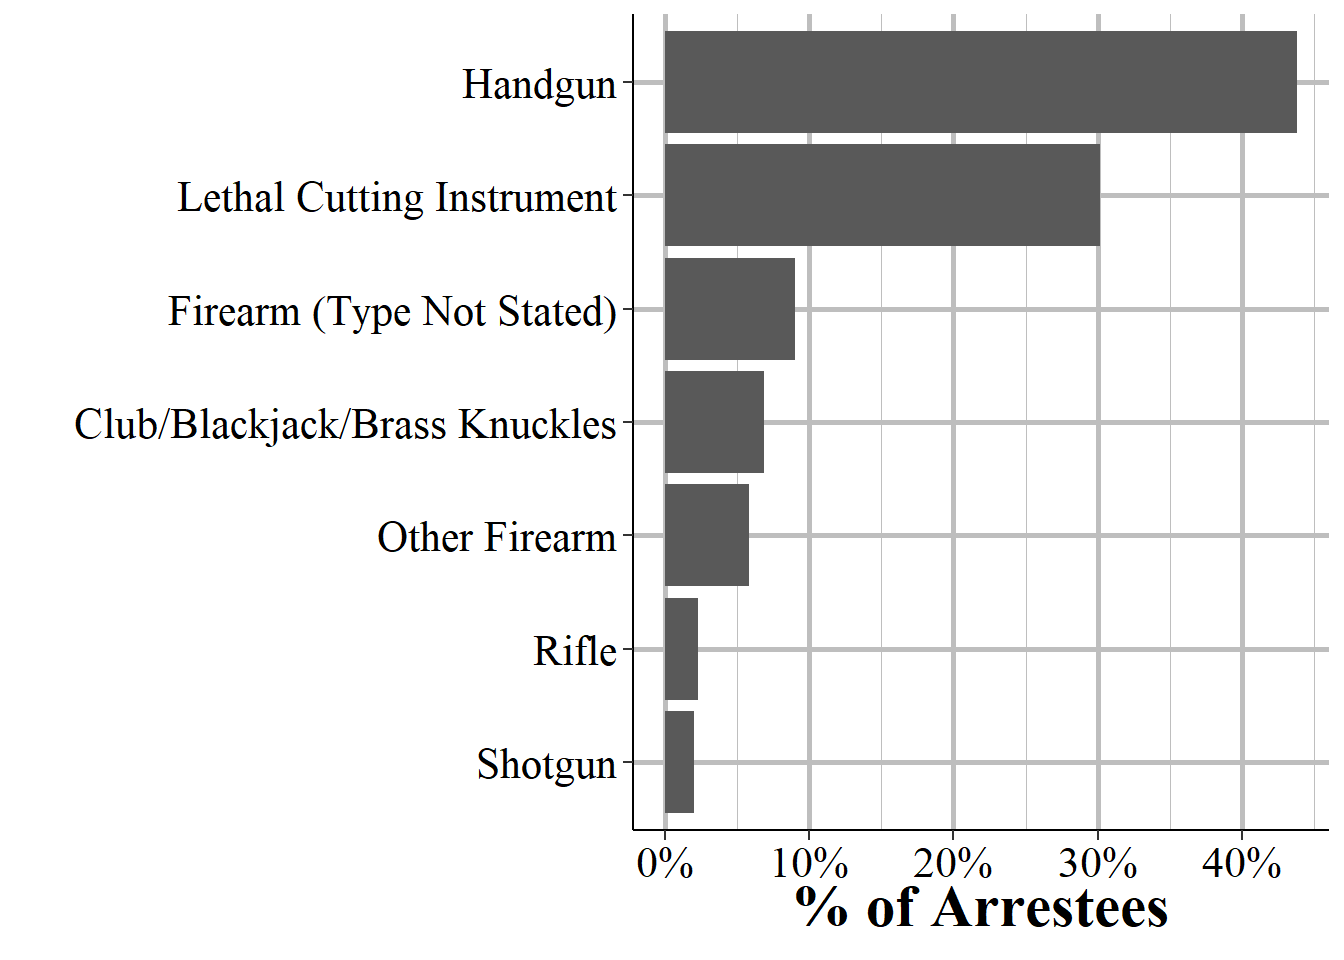 The distribution of weapon usage for all arrestees in 2019 who were arrested with a weapon (i.e. excludes unarmed arrestees).